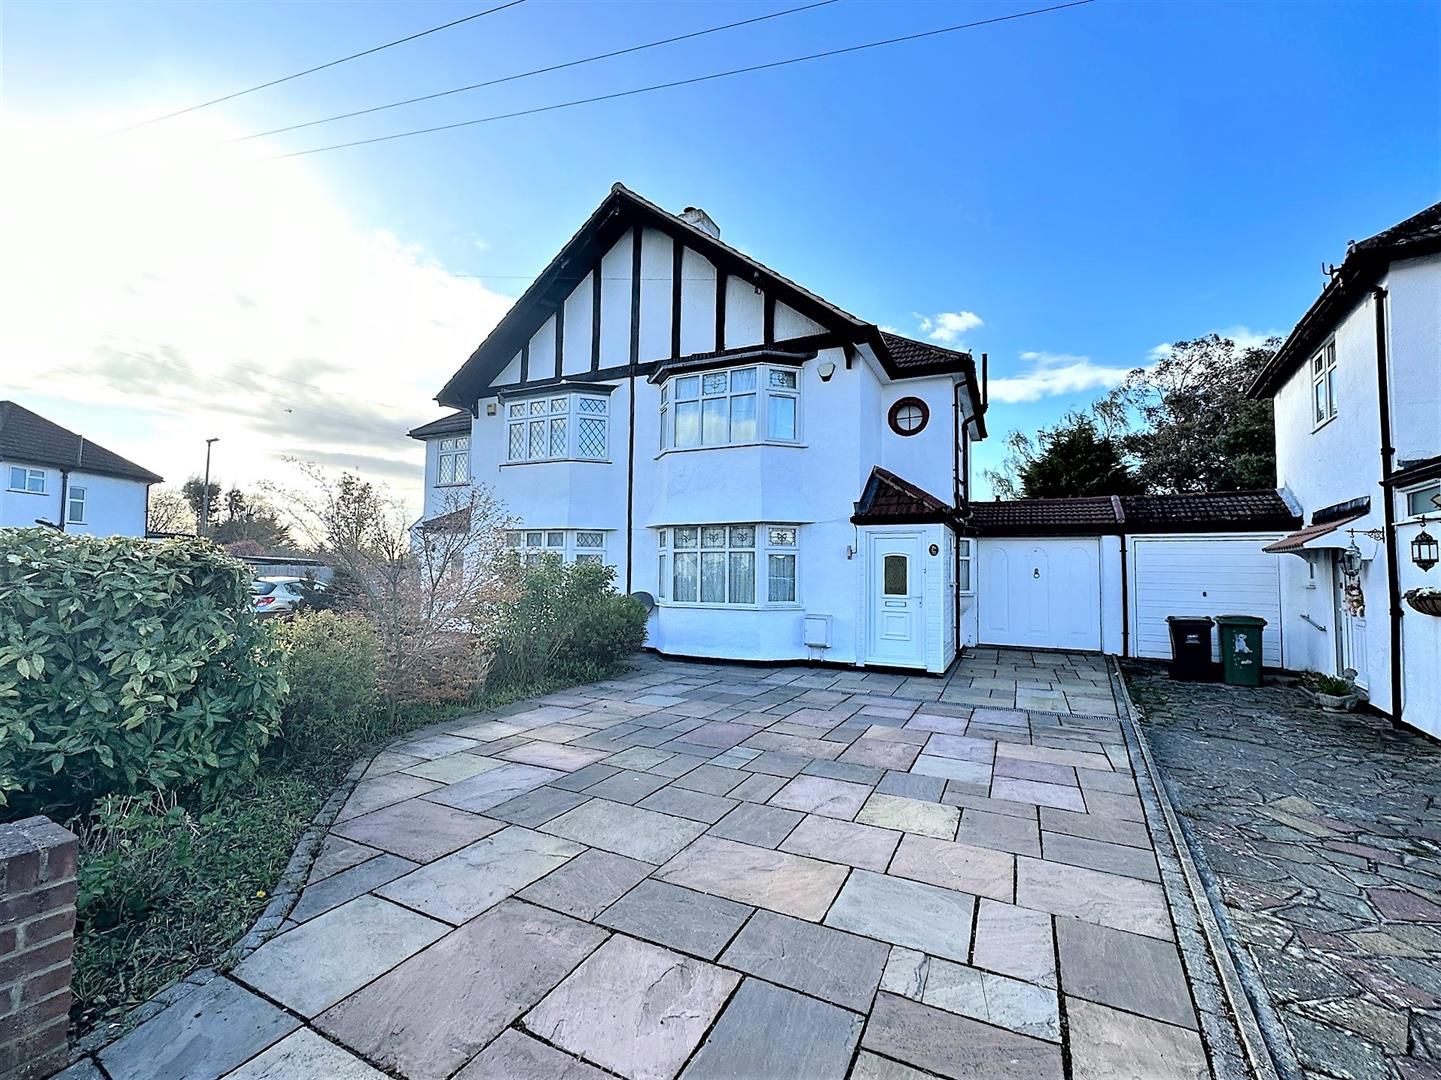 Crest View Drive, Petts Wood, Kent, BR5 1BY